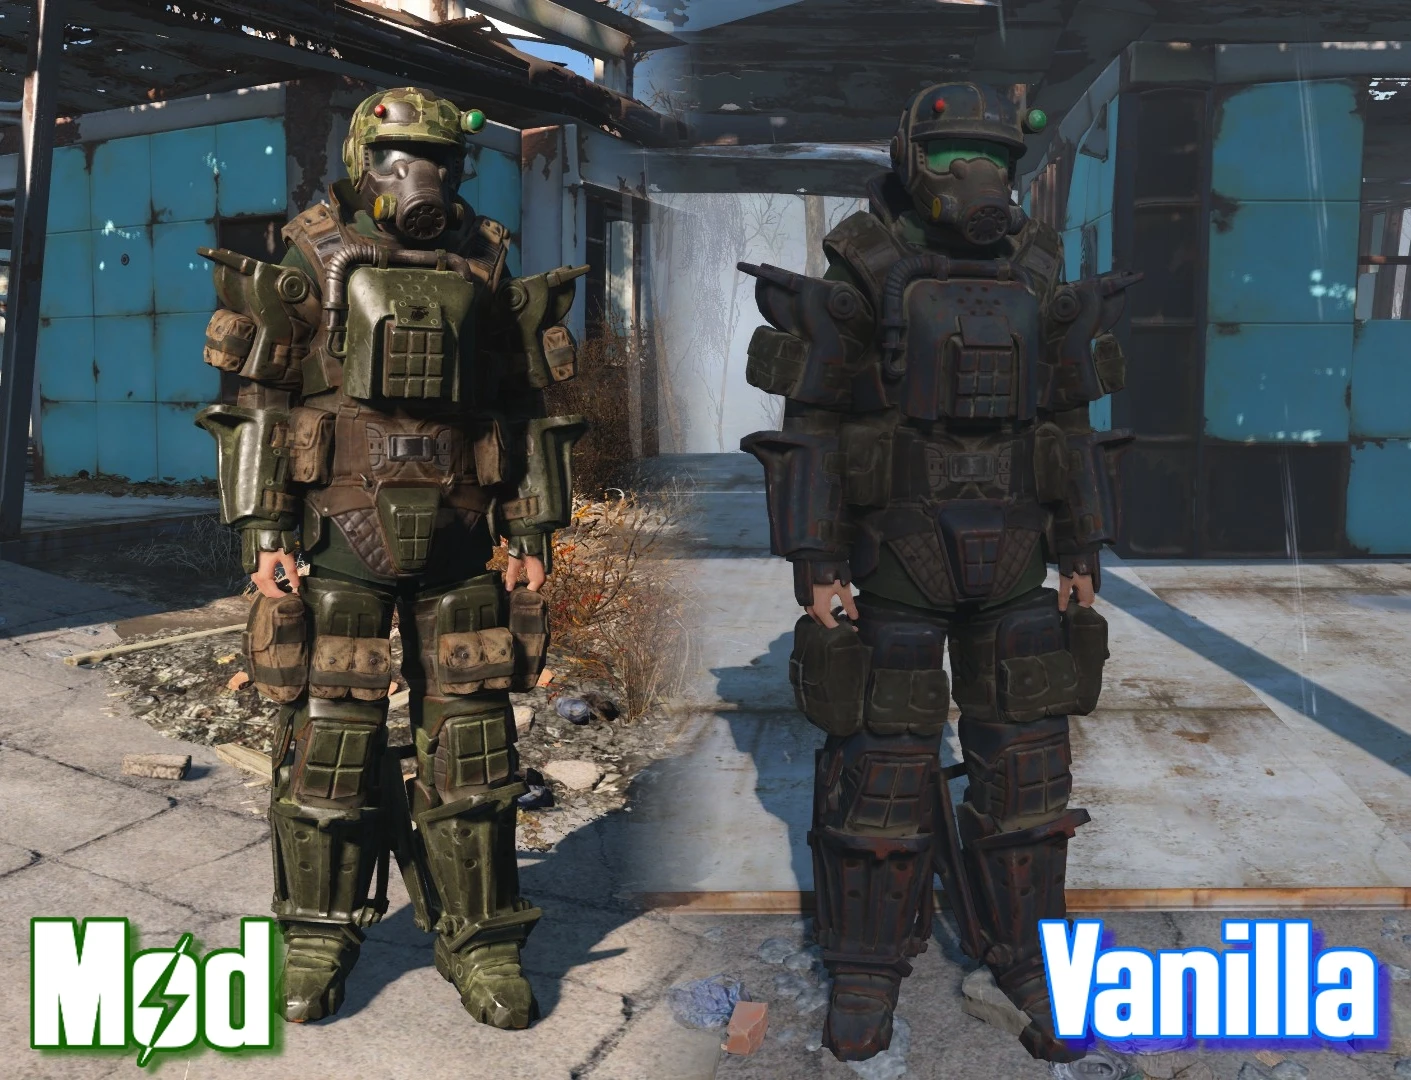 Fallout 4 marine armor cosplay sales